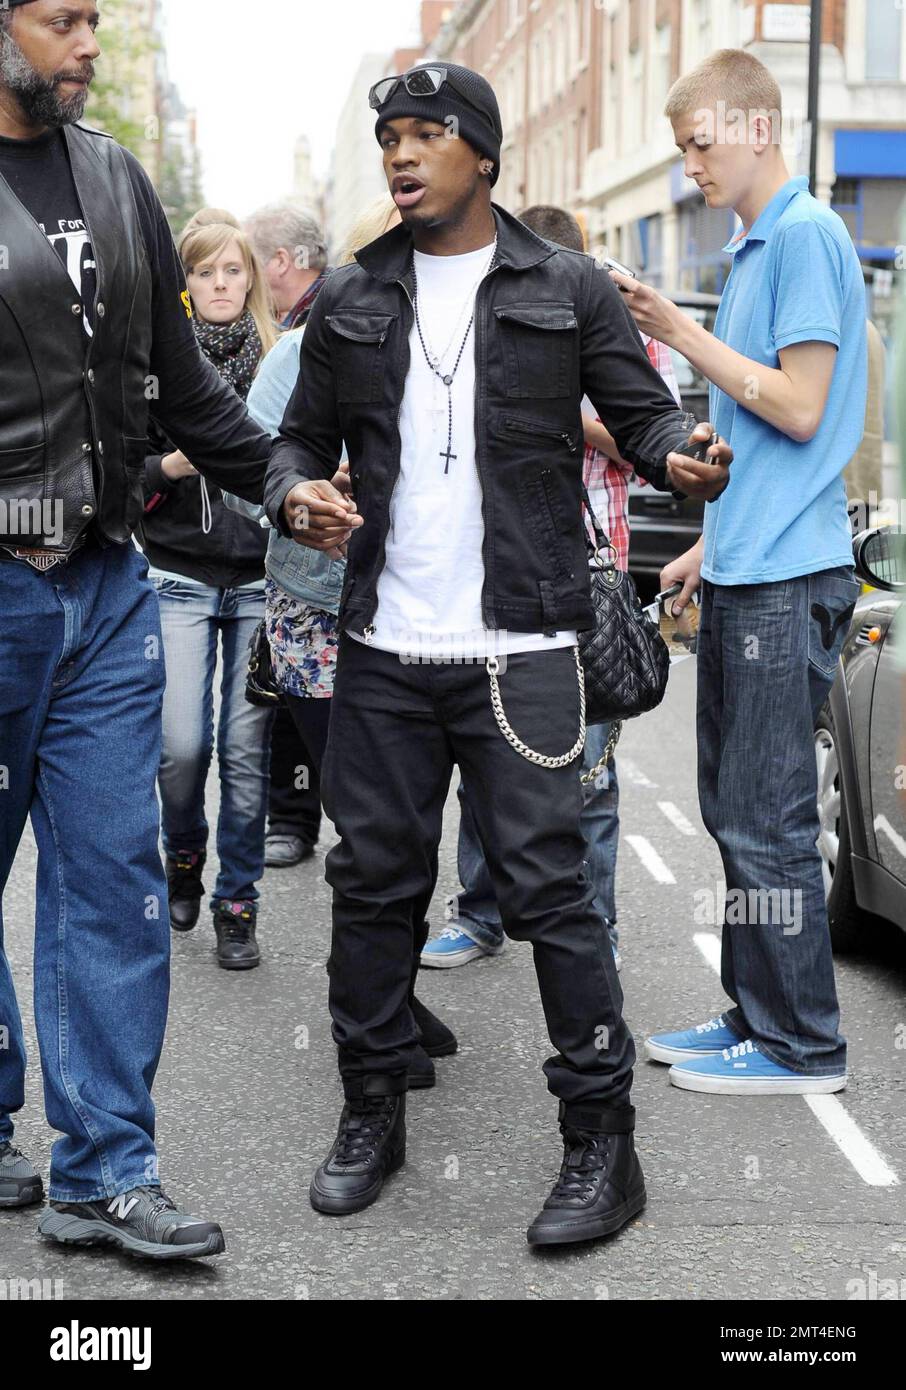 American pop and R&B artist Ne-Yo (Shaffer Smith) arrives at BBC Radio 1 with his bodyguard in tow for an interview at the studio.  The musician will soon be heading to Australia and Brazil for a number of summer concerts. London, UK. 07/08/10. Stock Photo